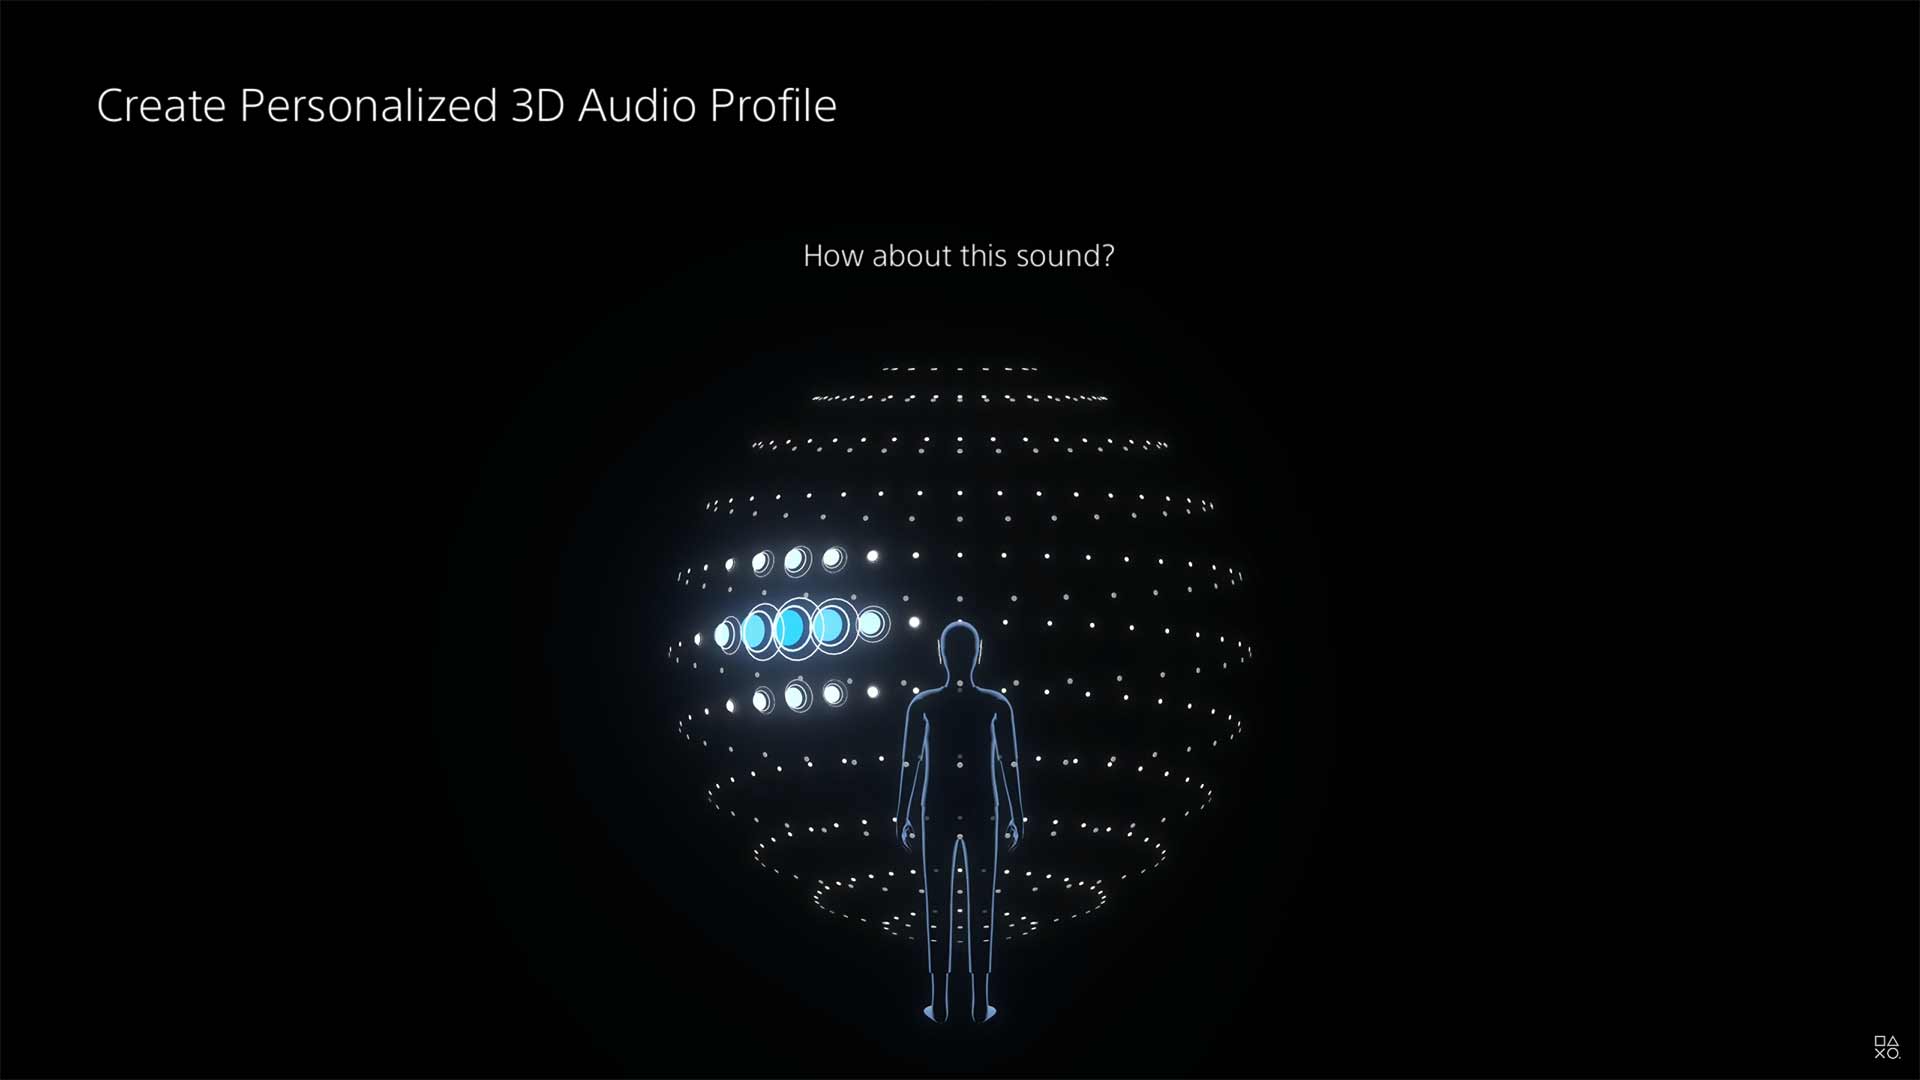 The next PlayStation 5 update will finally add personalized 3D audio profiles